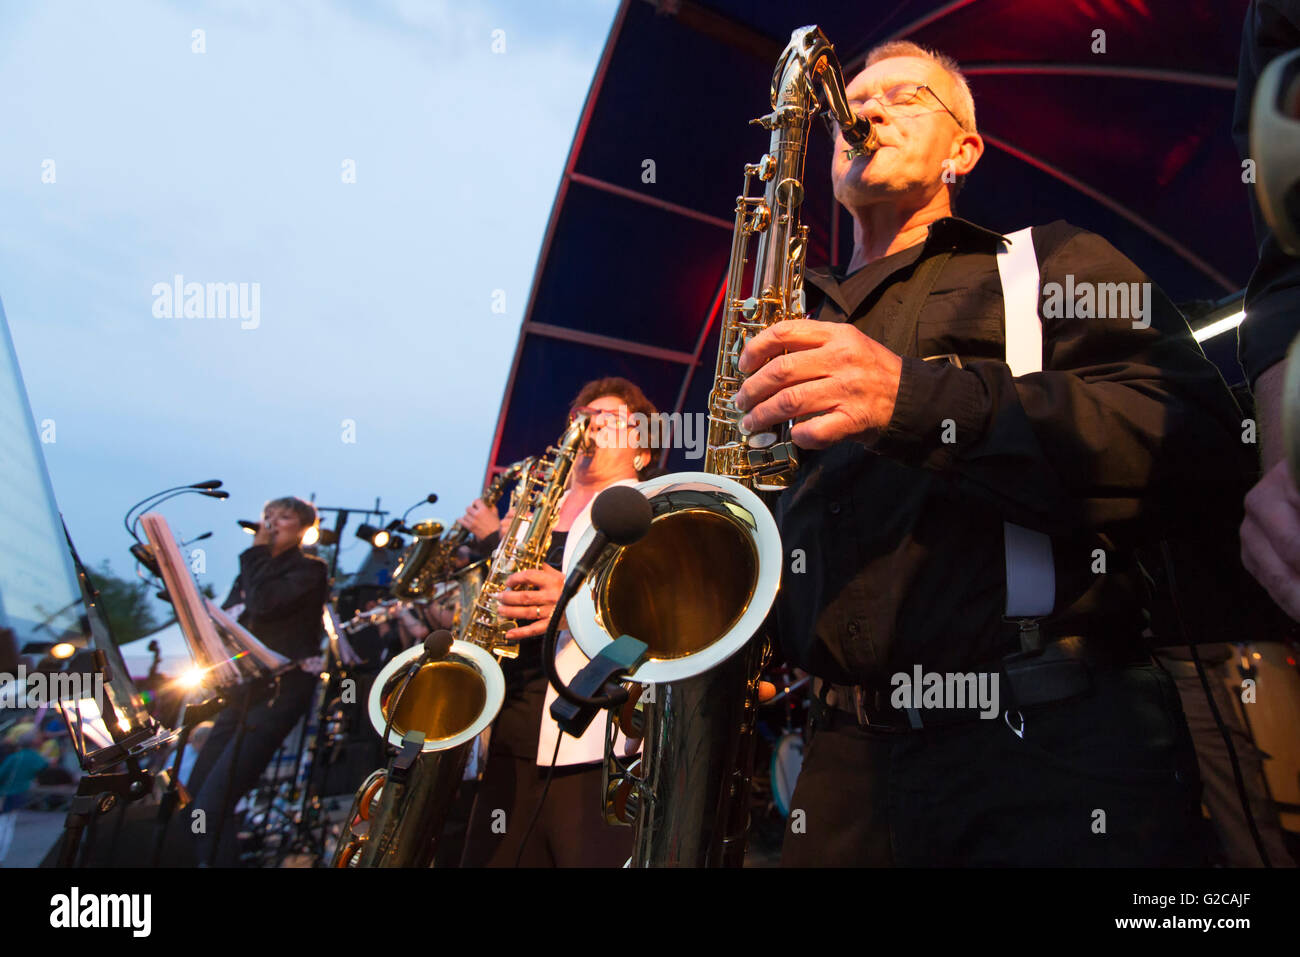 Band on stage with musicians playing  brass instruments on a summer evening Stock Photo